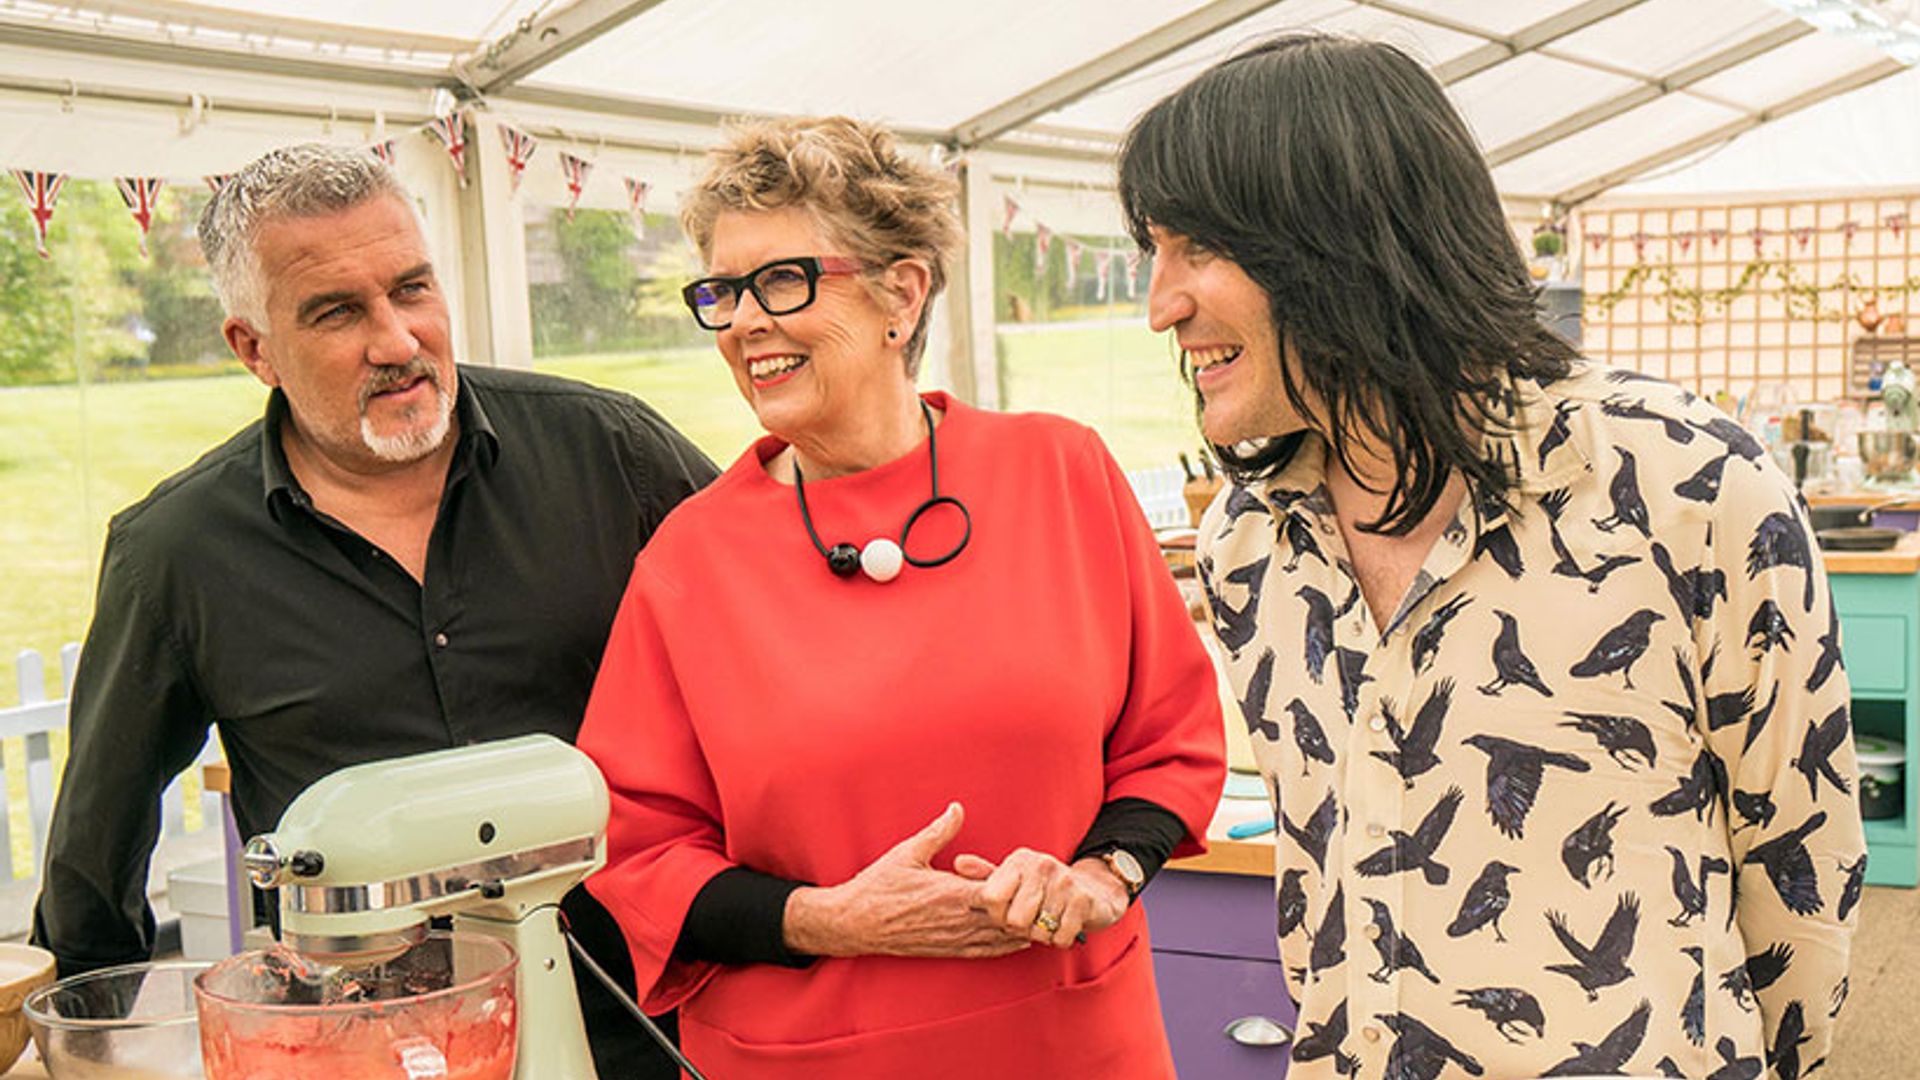 Fans react to Great British Bake Off with Noel Fielding, Sandi Toksvig and Prue Leith  